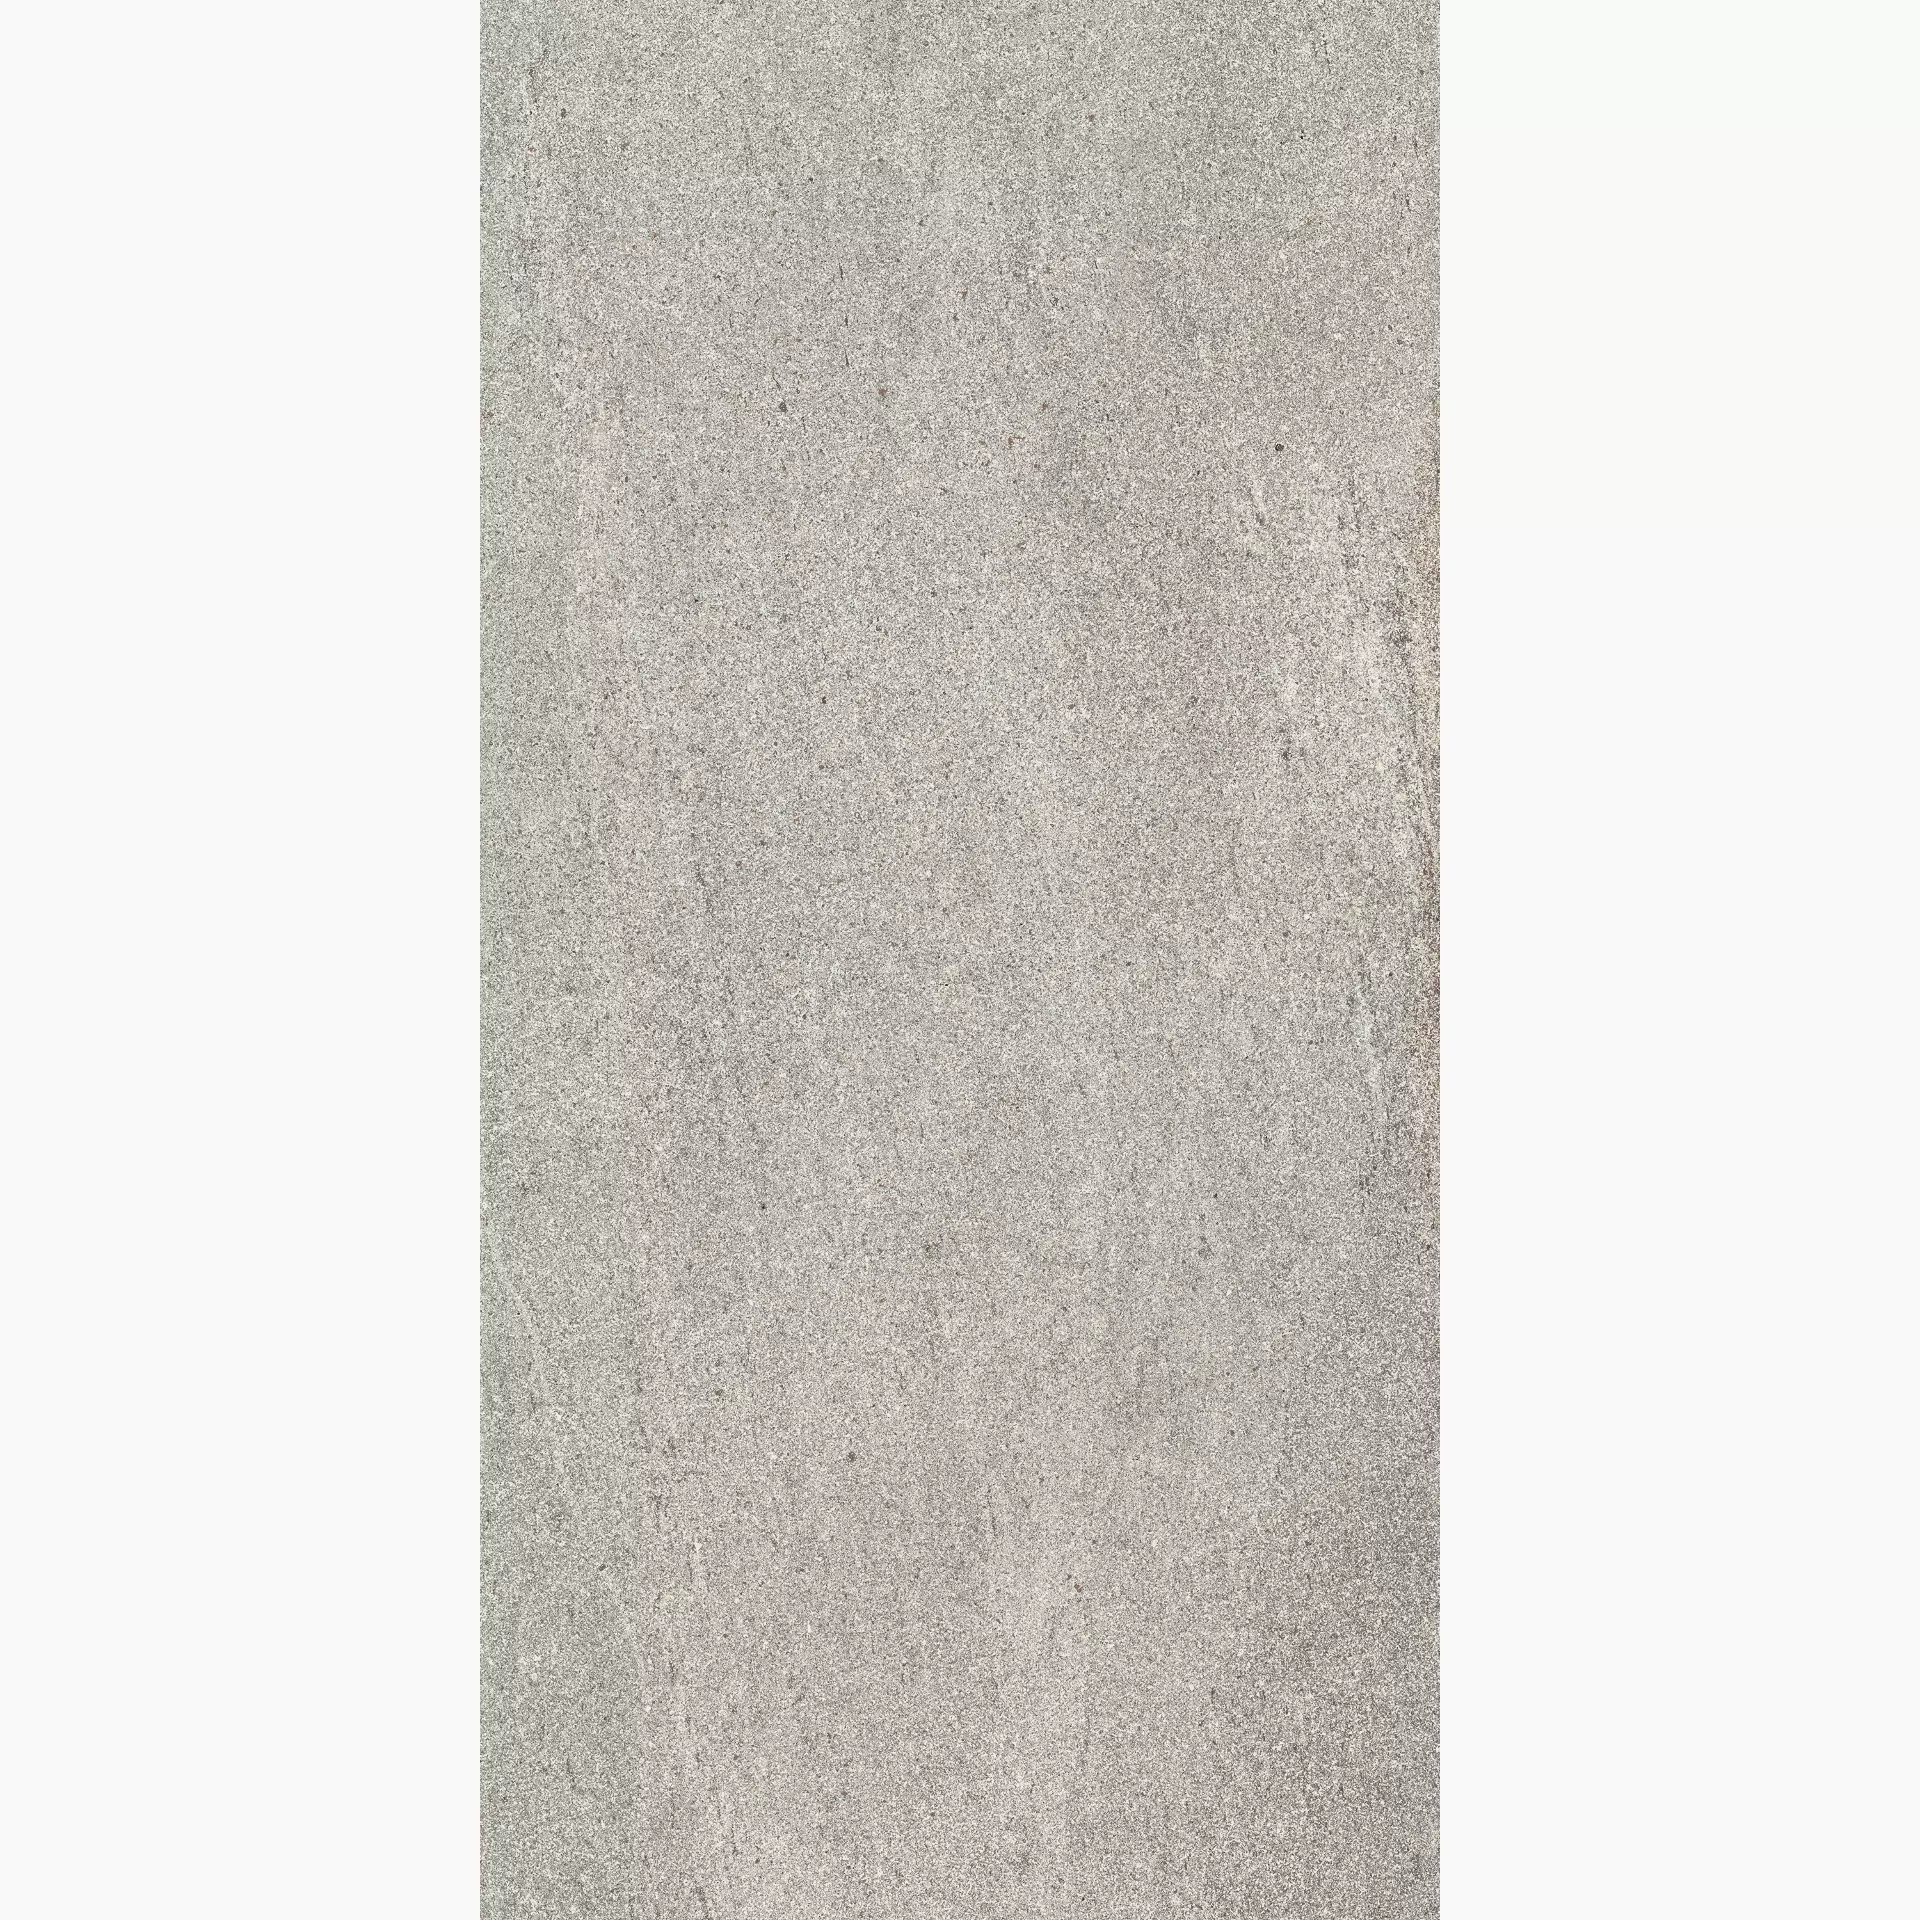 Cottodeste Blend Stone Light Hammered Protect EGXBS70 60x120cm rectified 20mm